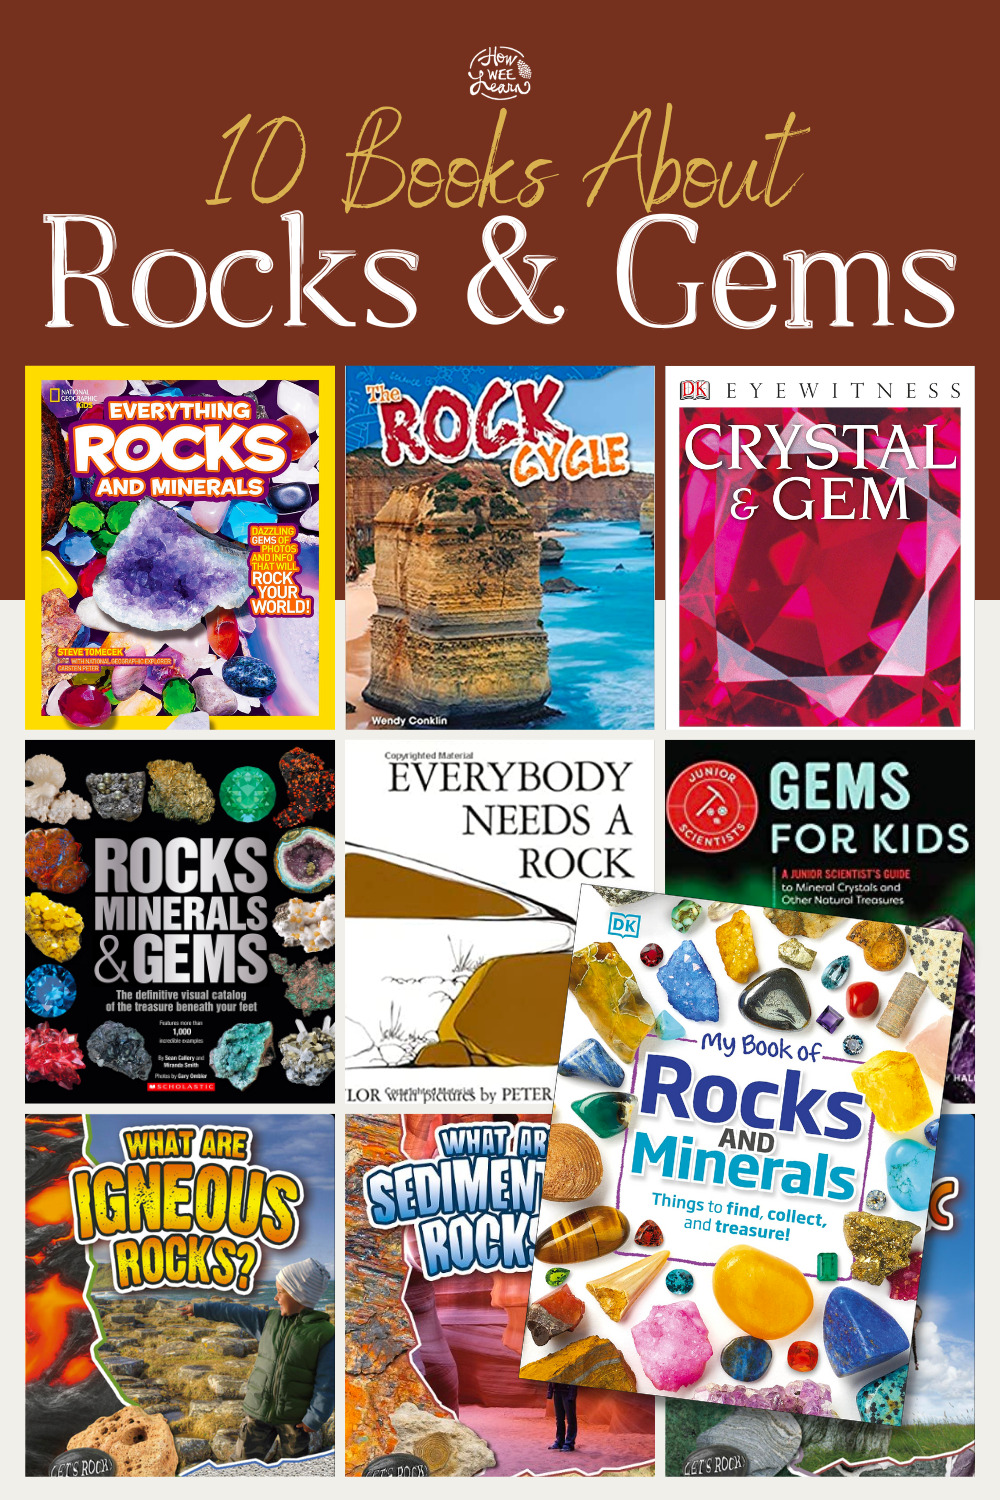 Cover art from 10 books about rocks and gems